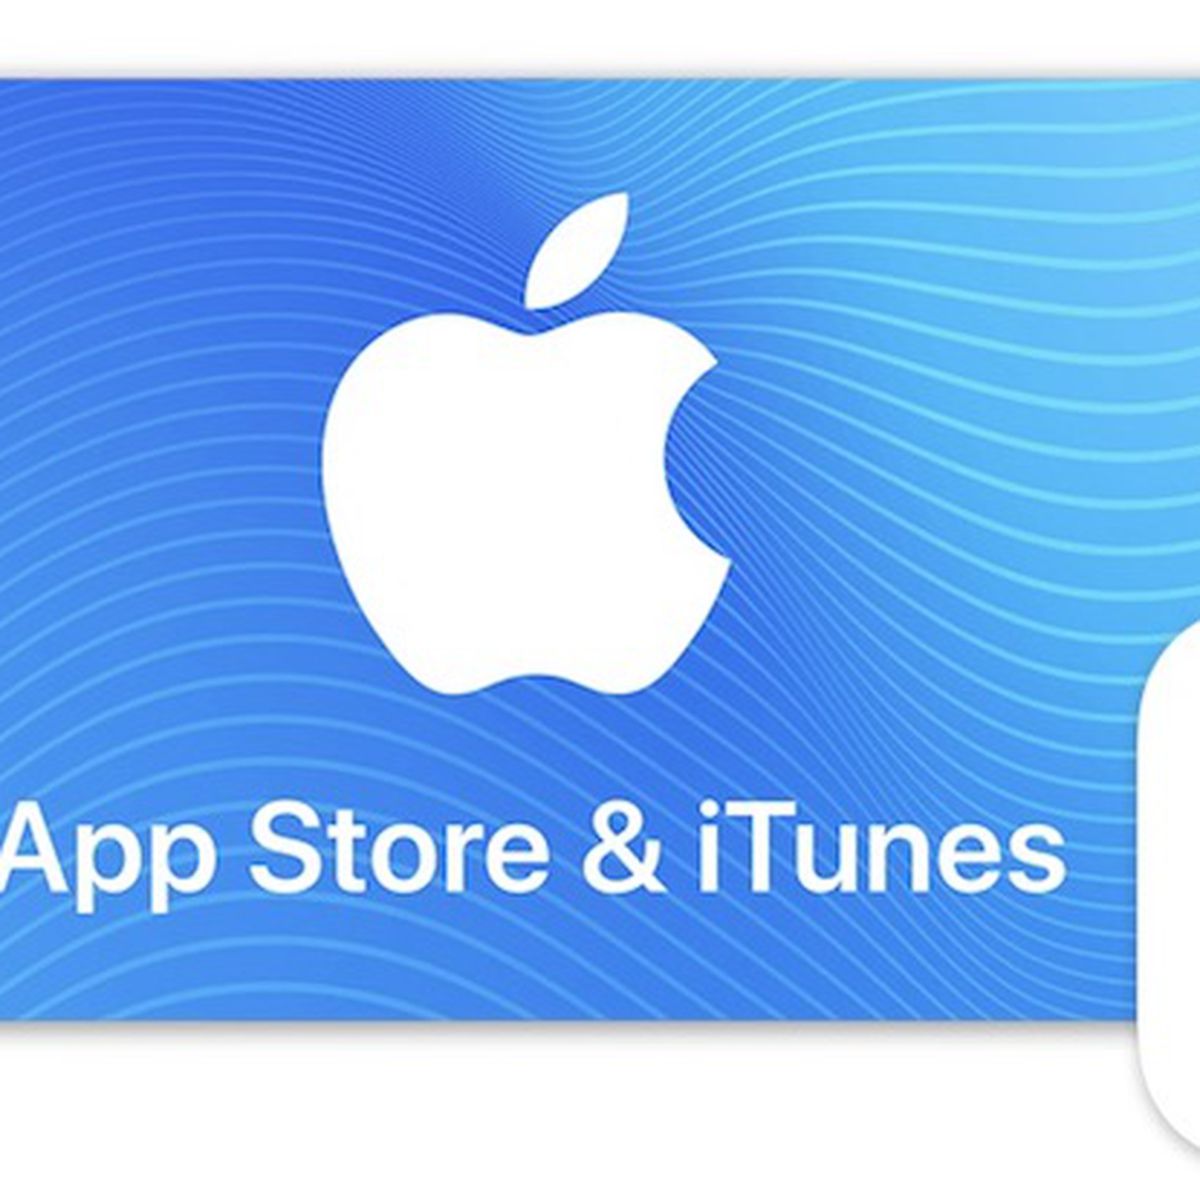 $40 App Store & iTunes Gift Cards Multipack - Sam's Club